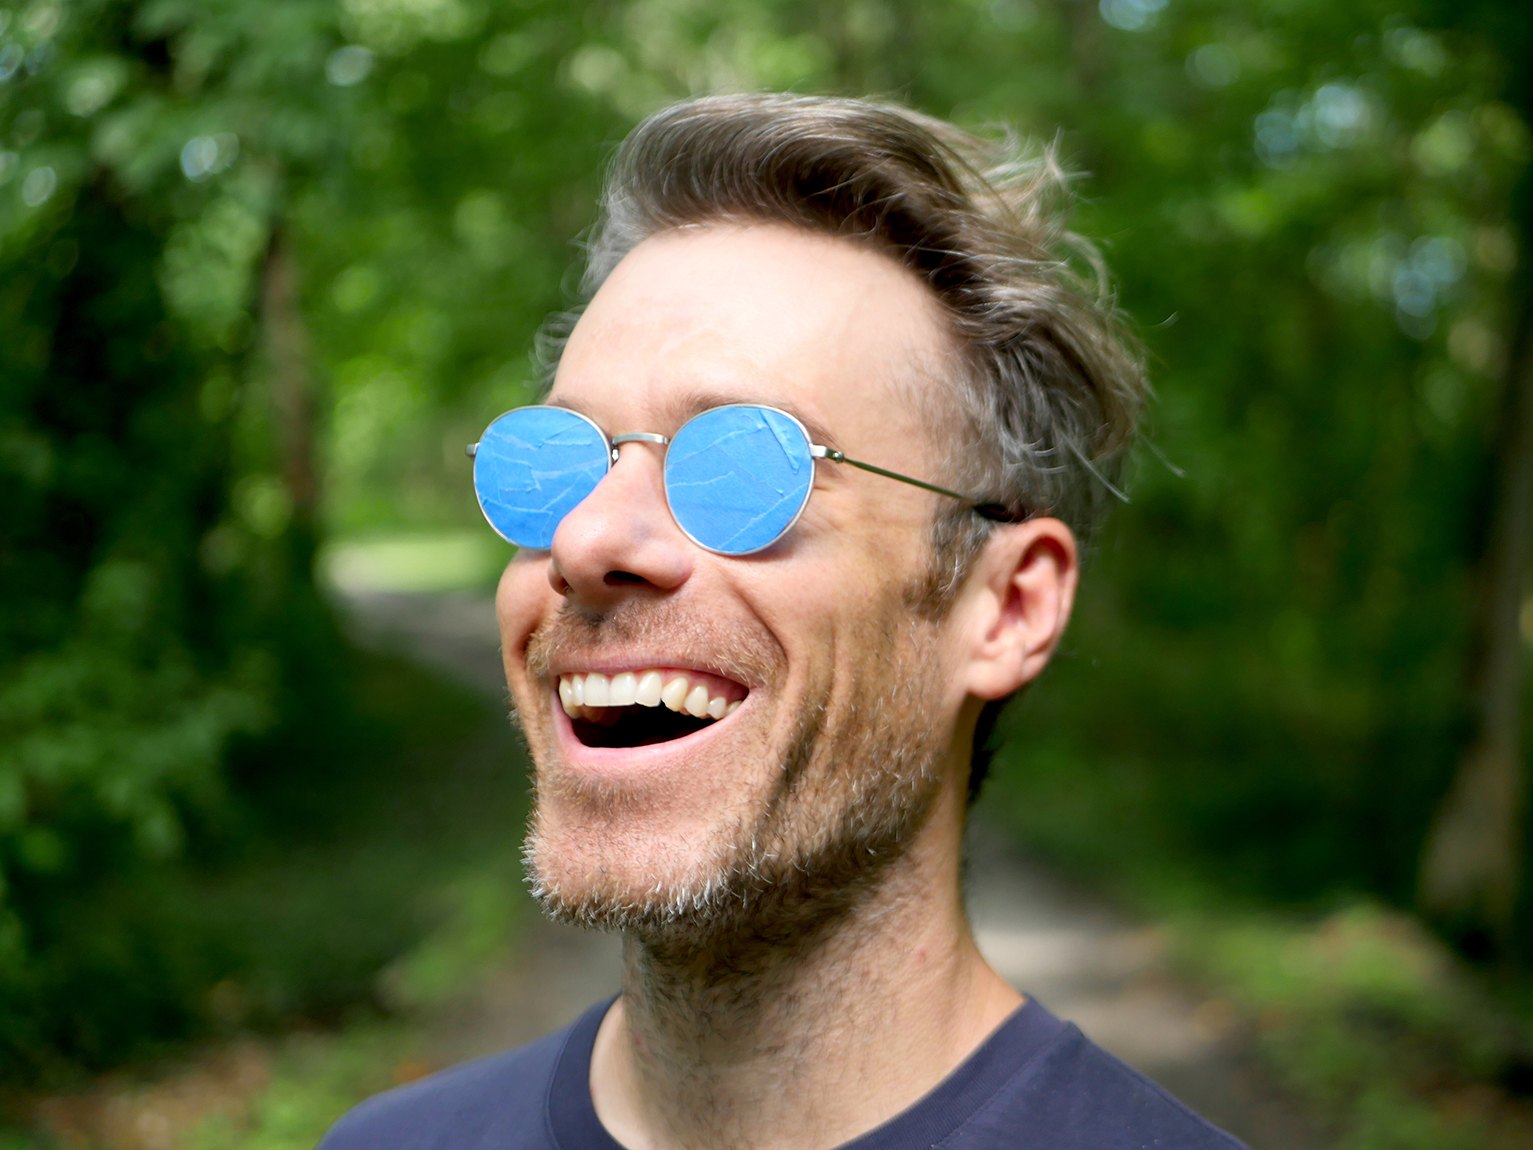 A portrait of Chris Kallmyer wearing listening glasses and smiling outdoors.